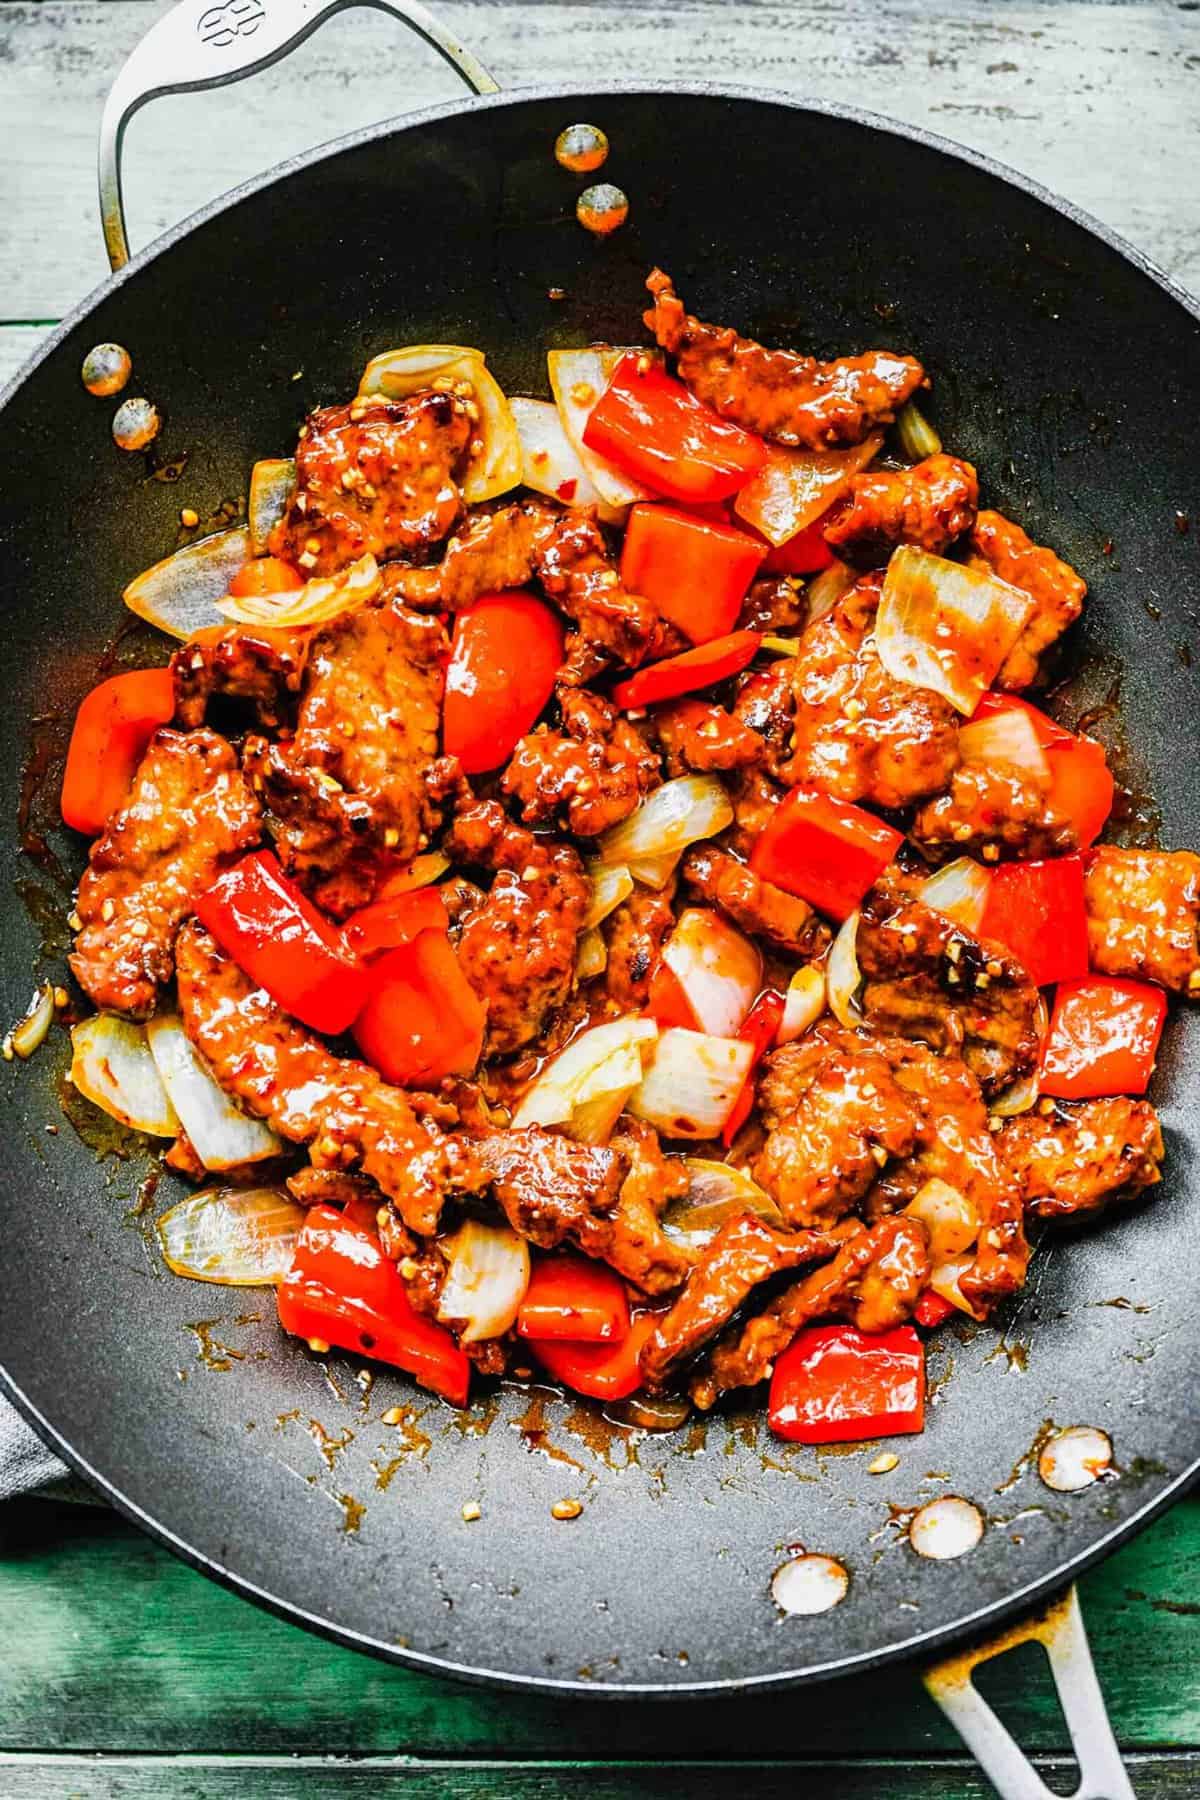 Beijing beef with bell peppers and onions in a wok.